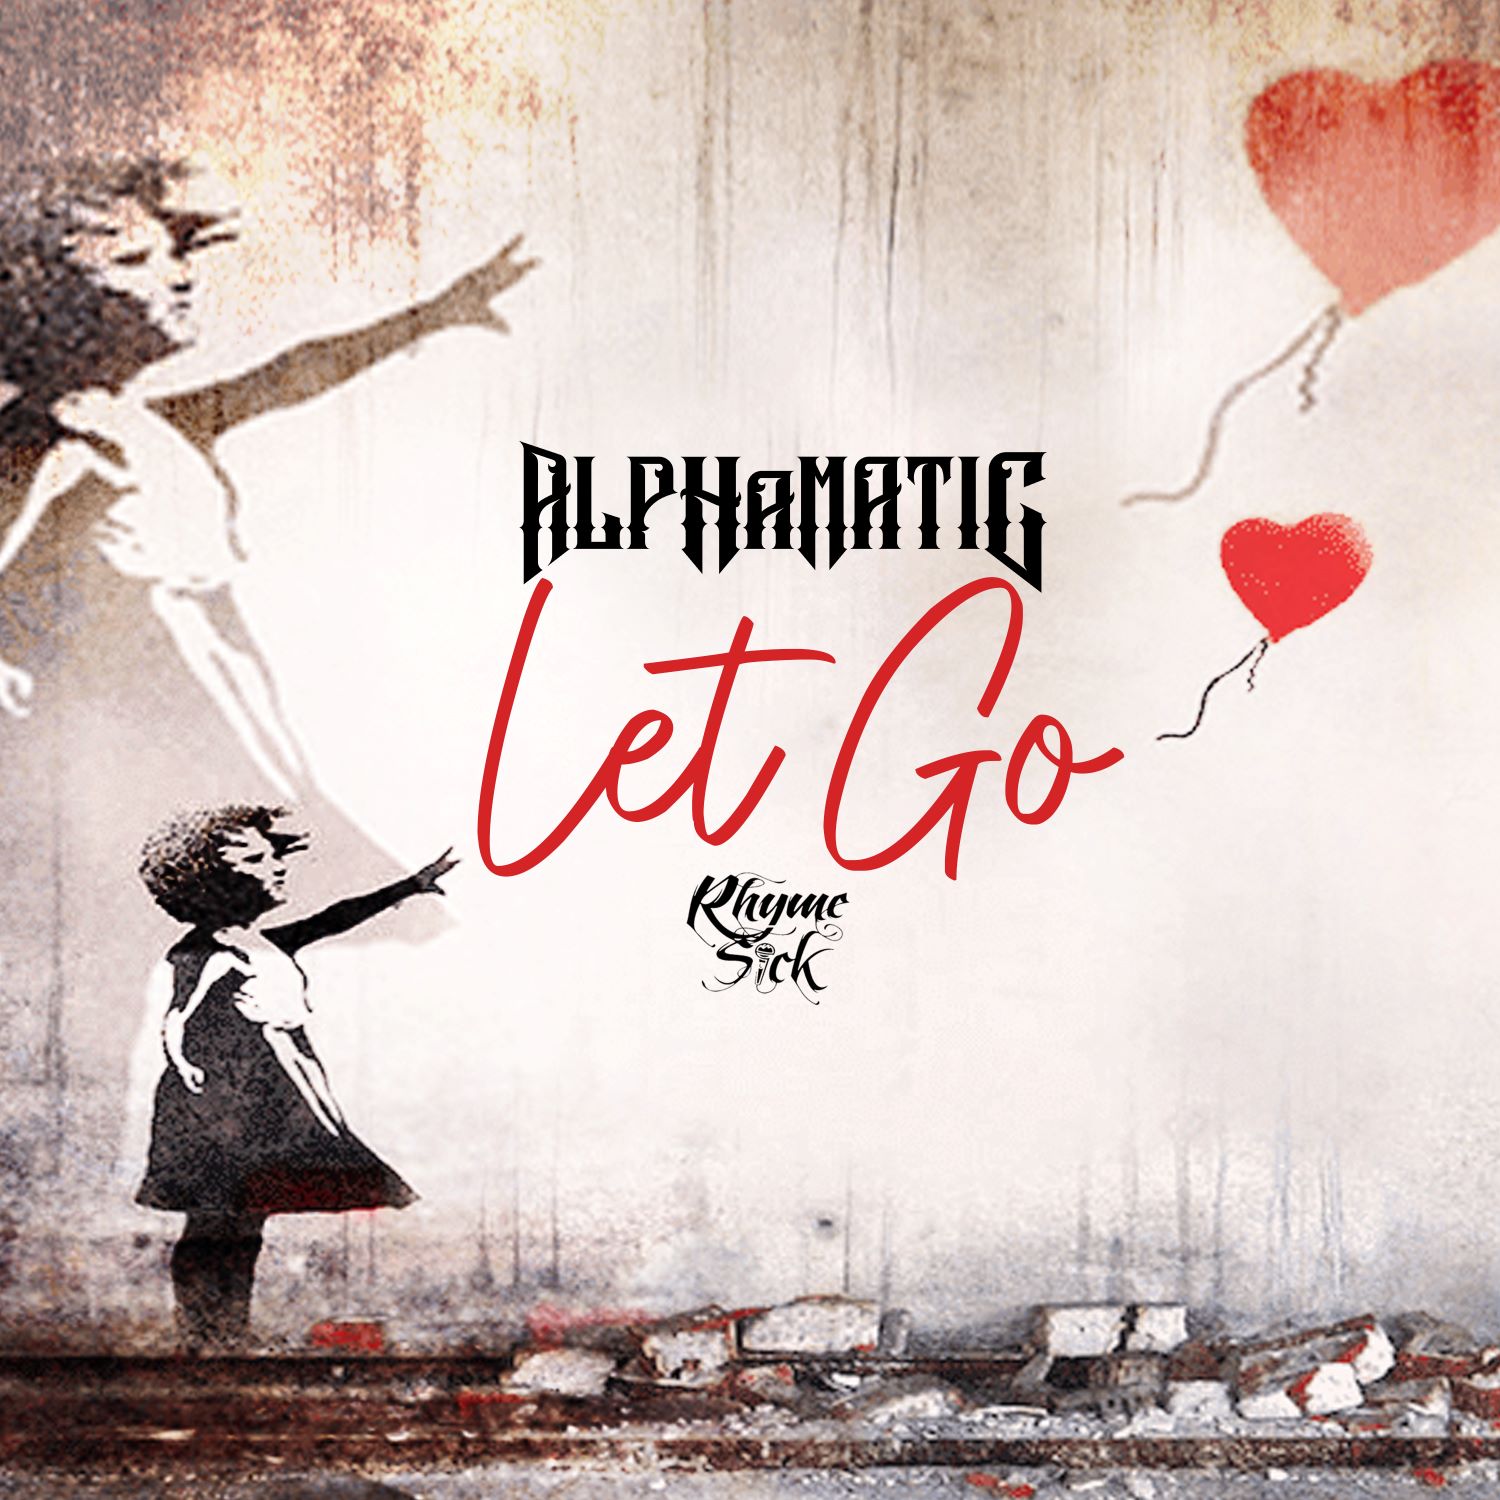 Let Go by Alphamatic Album Cover